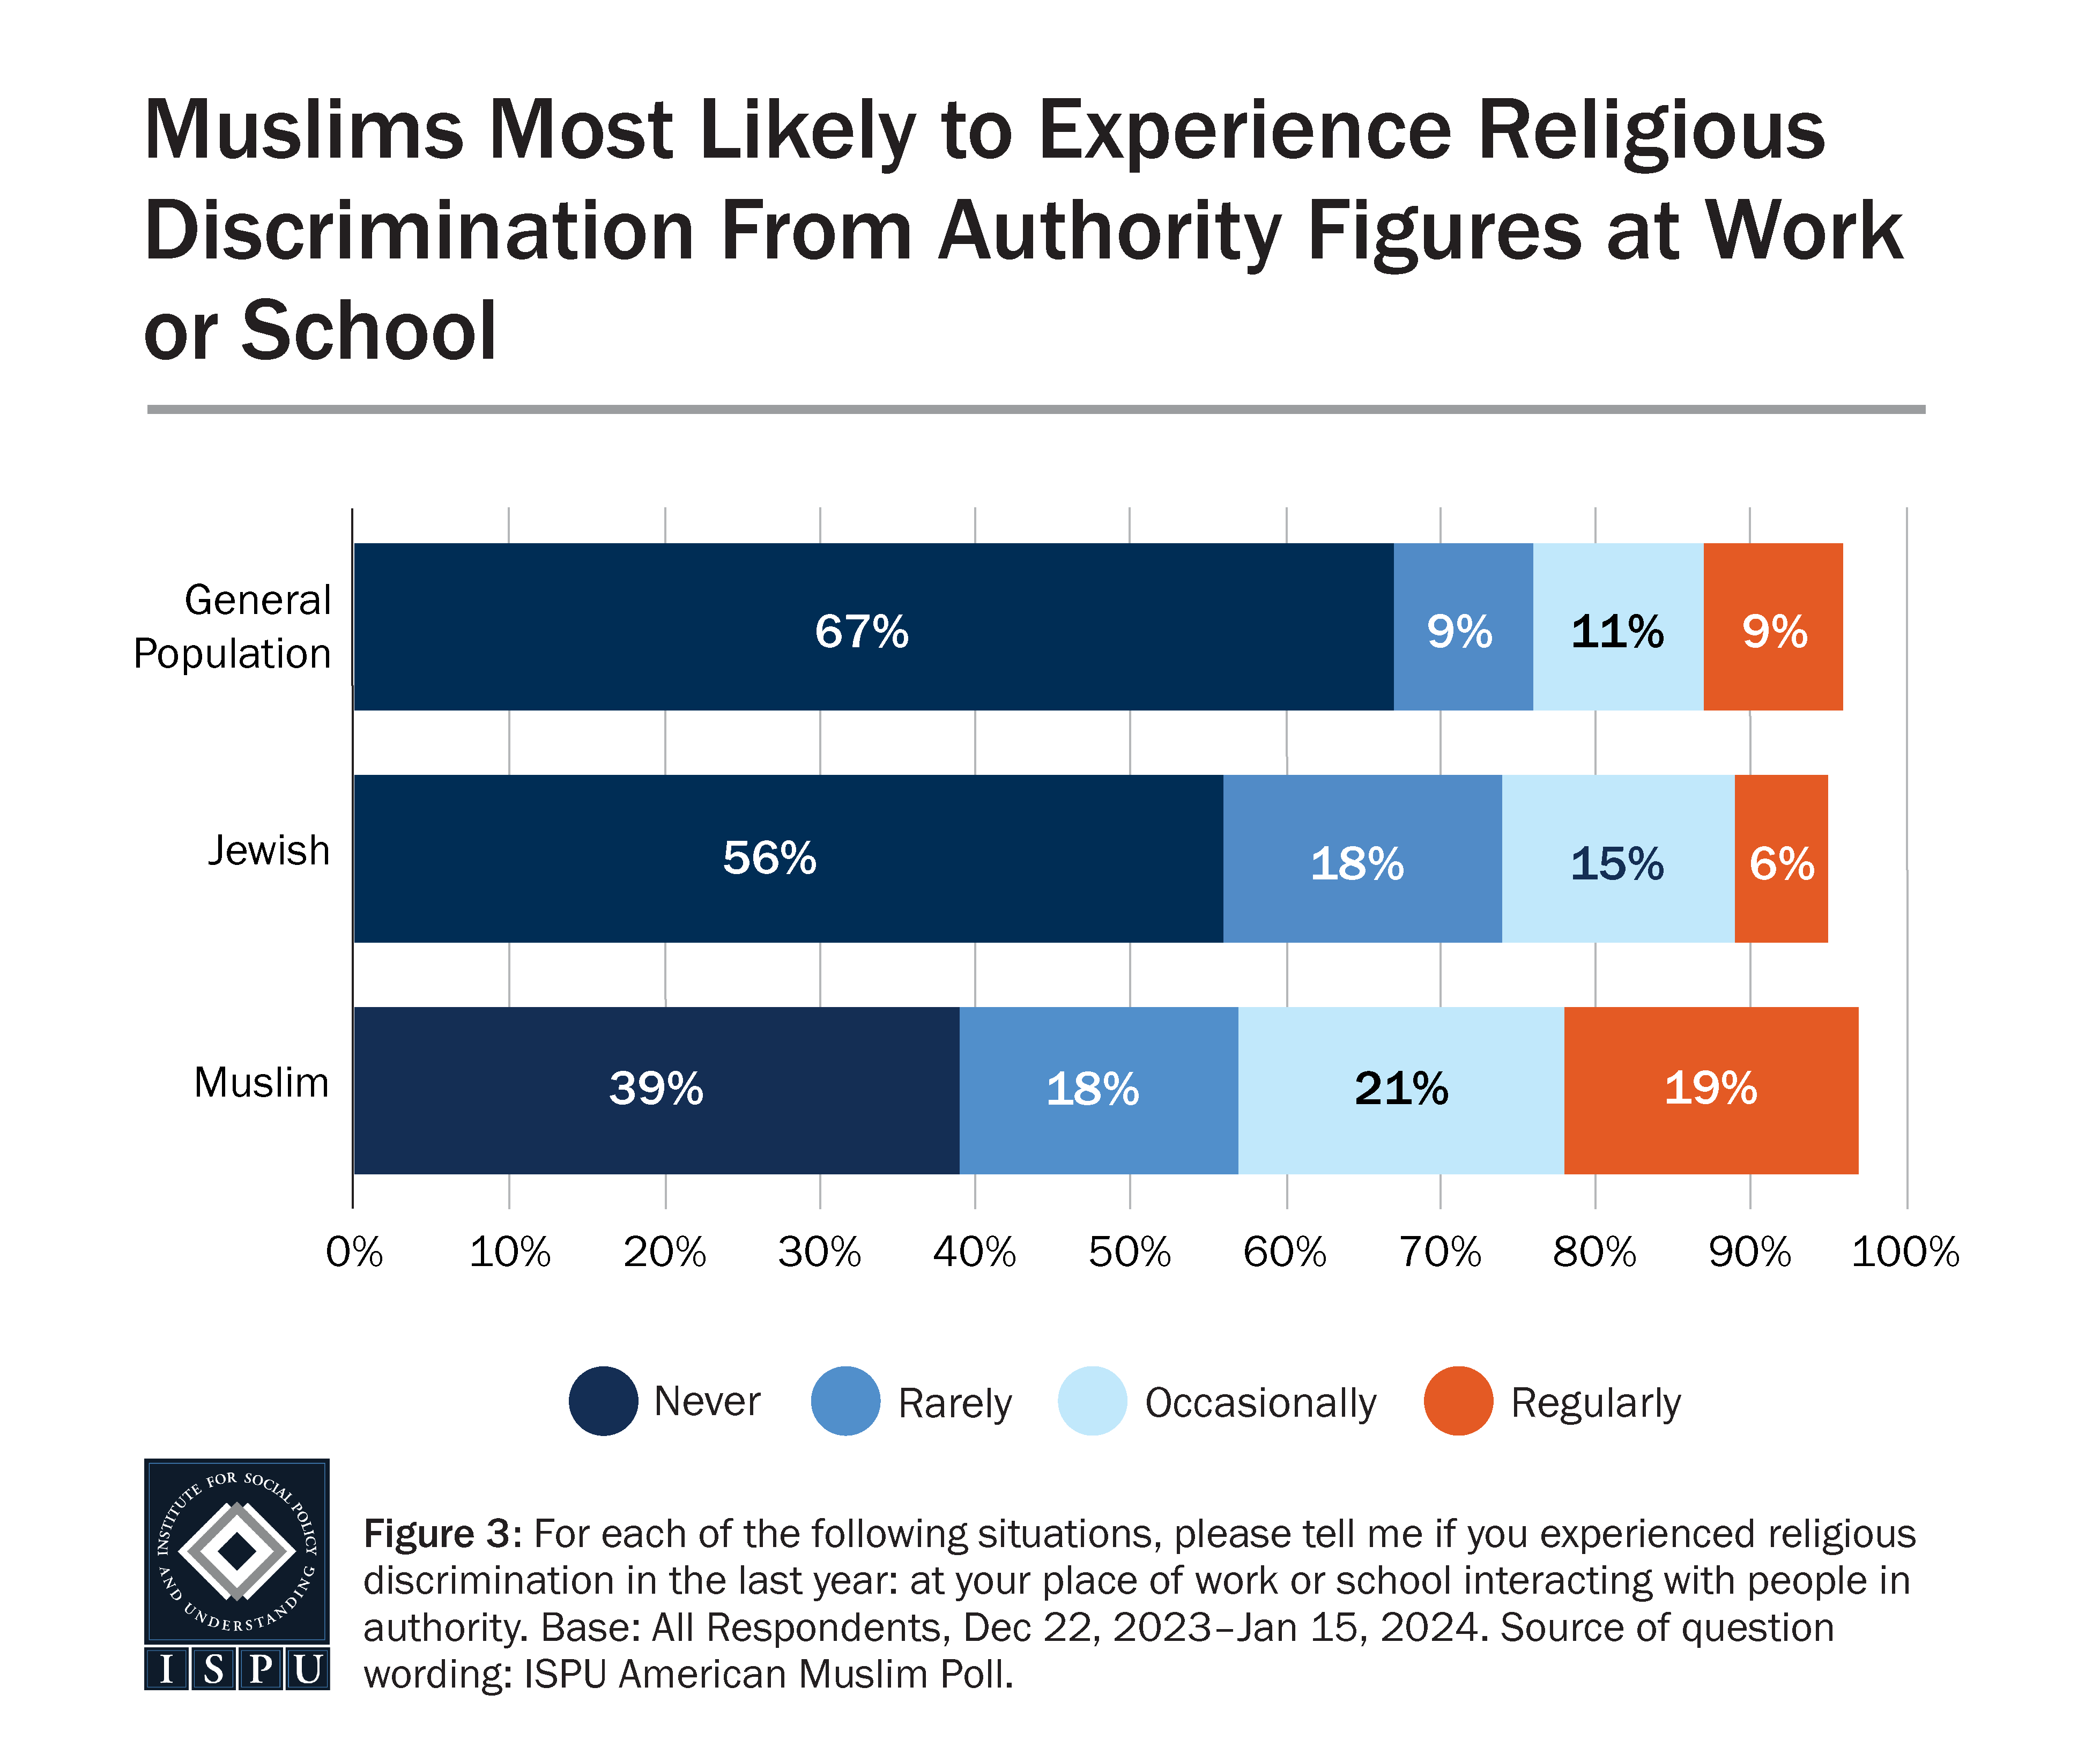 A bar graph showing the frequency of religious discrimination experienced by the general population, Jews, and Muslims at work or school when interacting with people in authority.